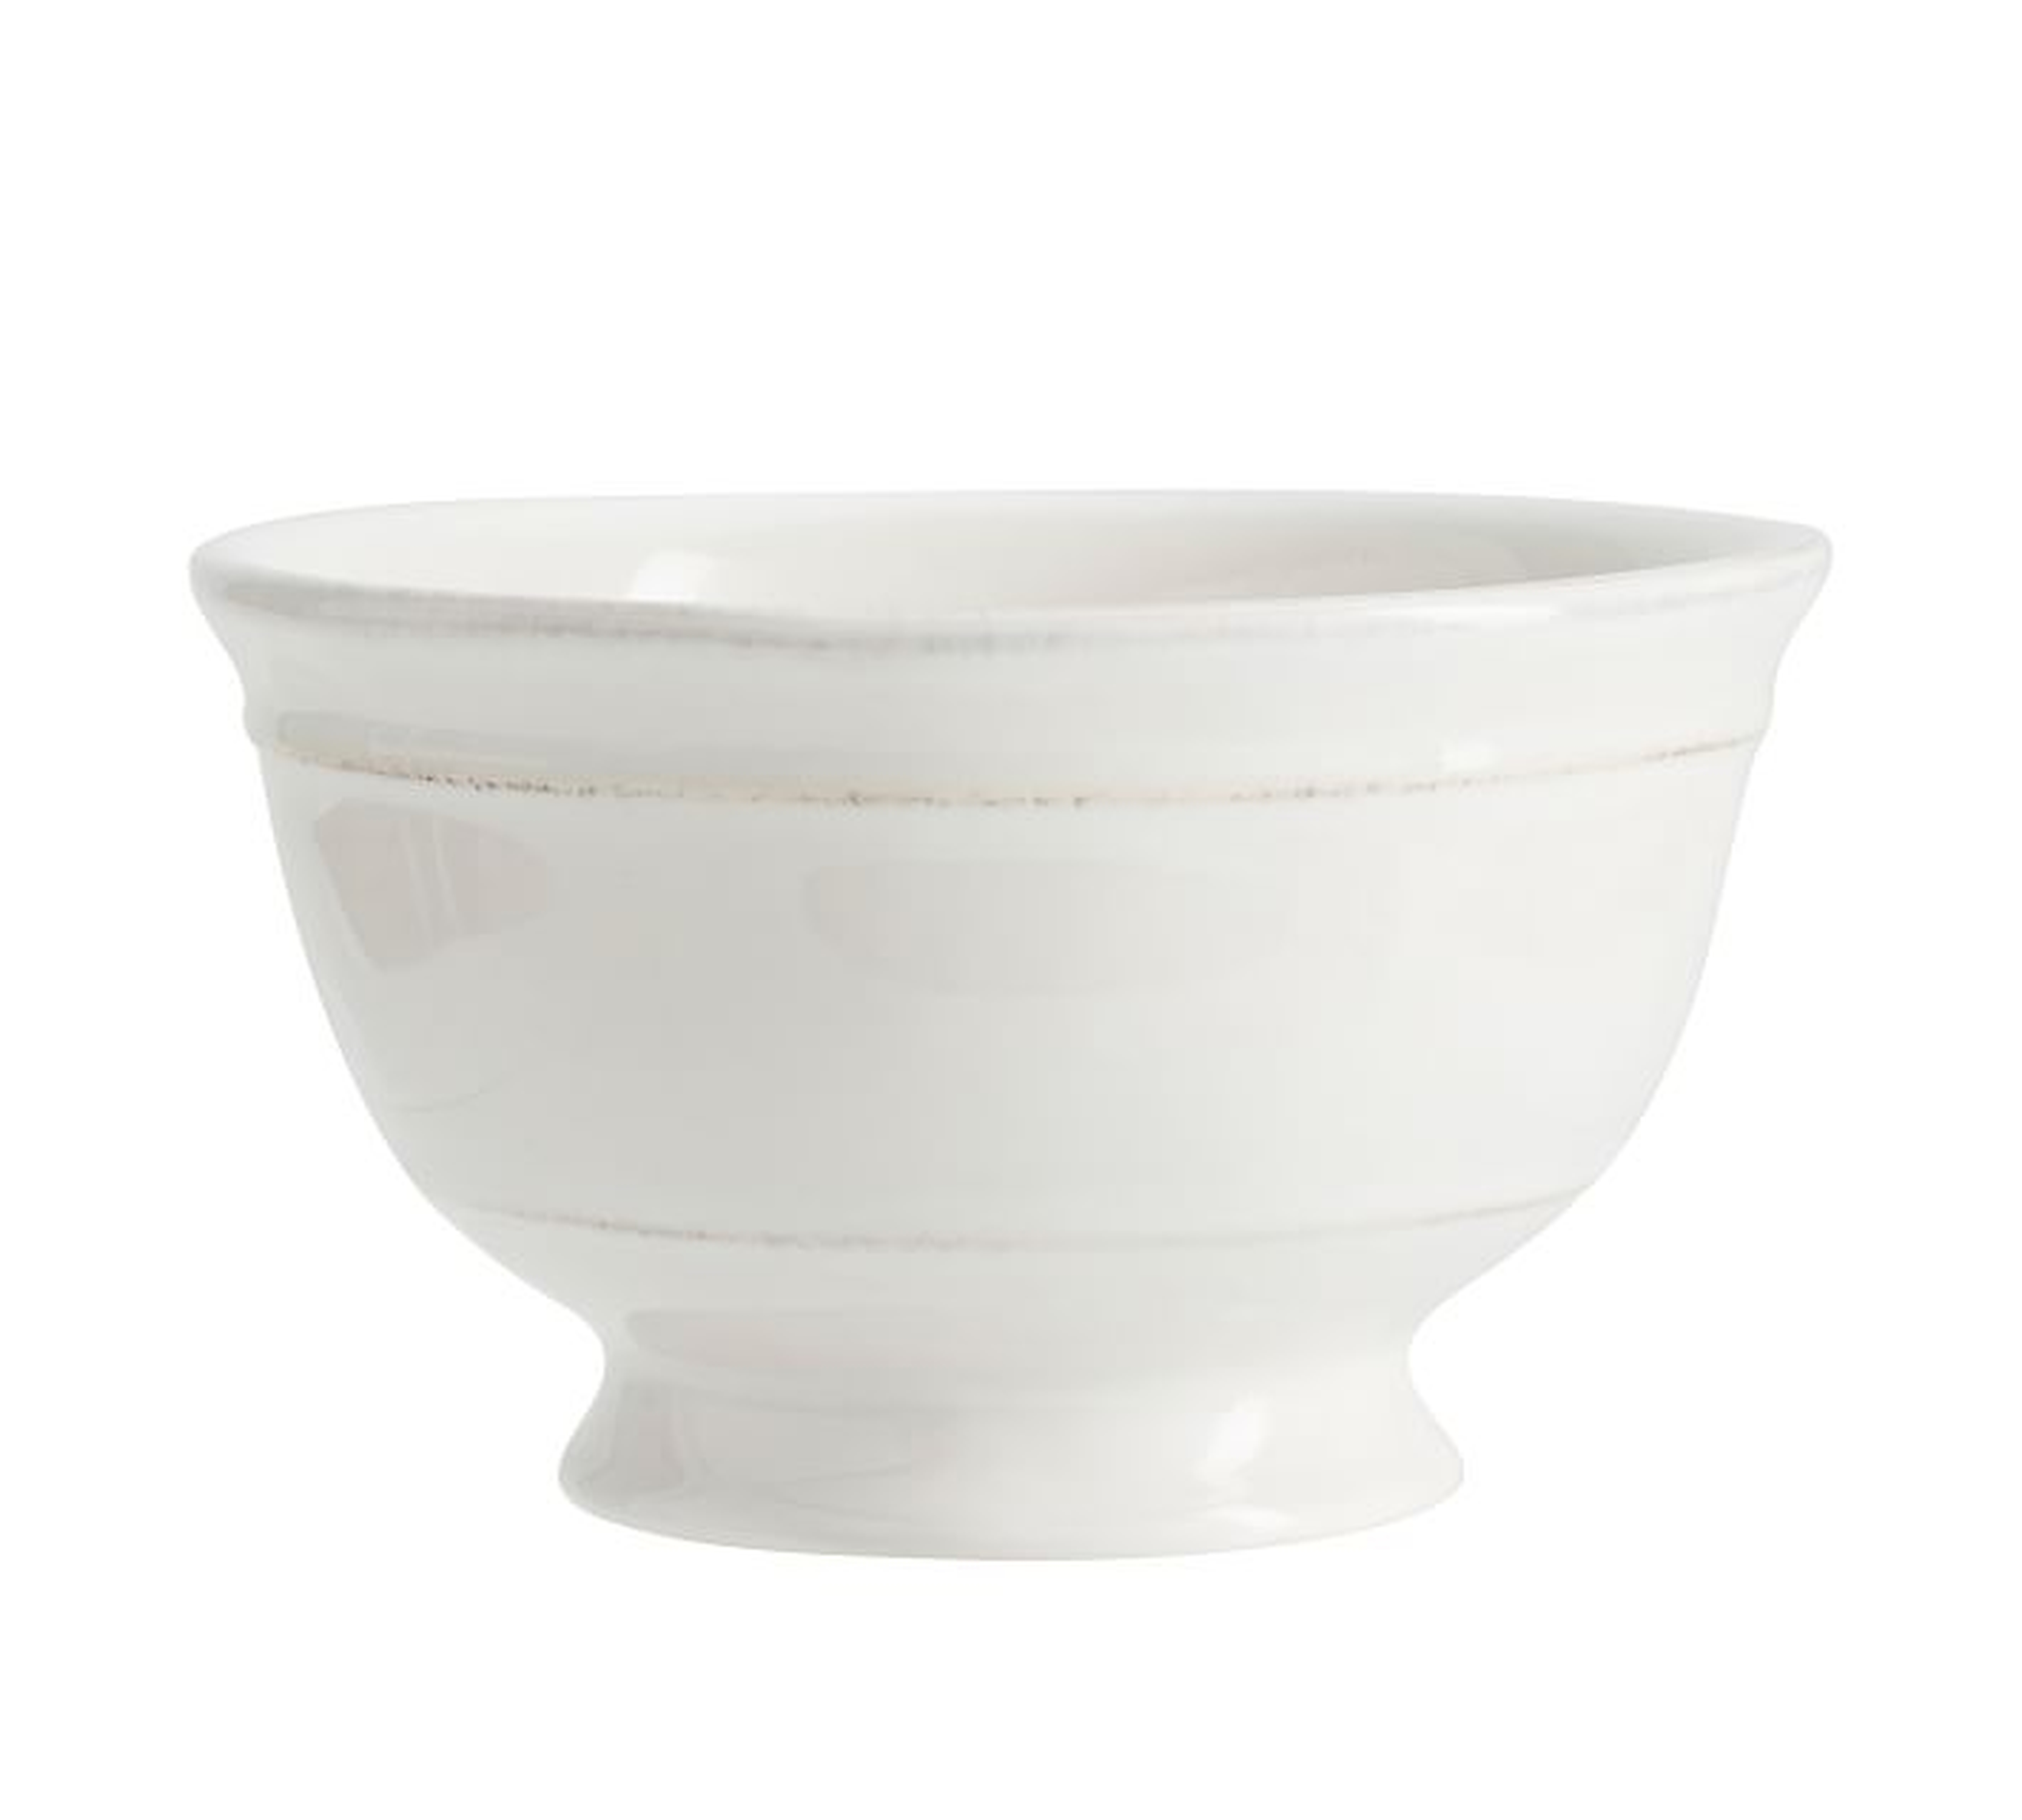 Cambria Small Footed Serving Bowl - Gray - Pottery Barn